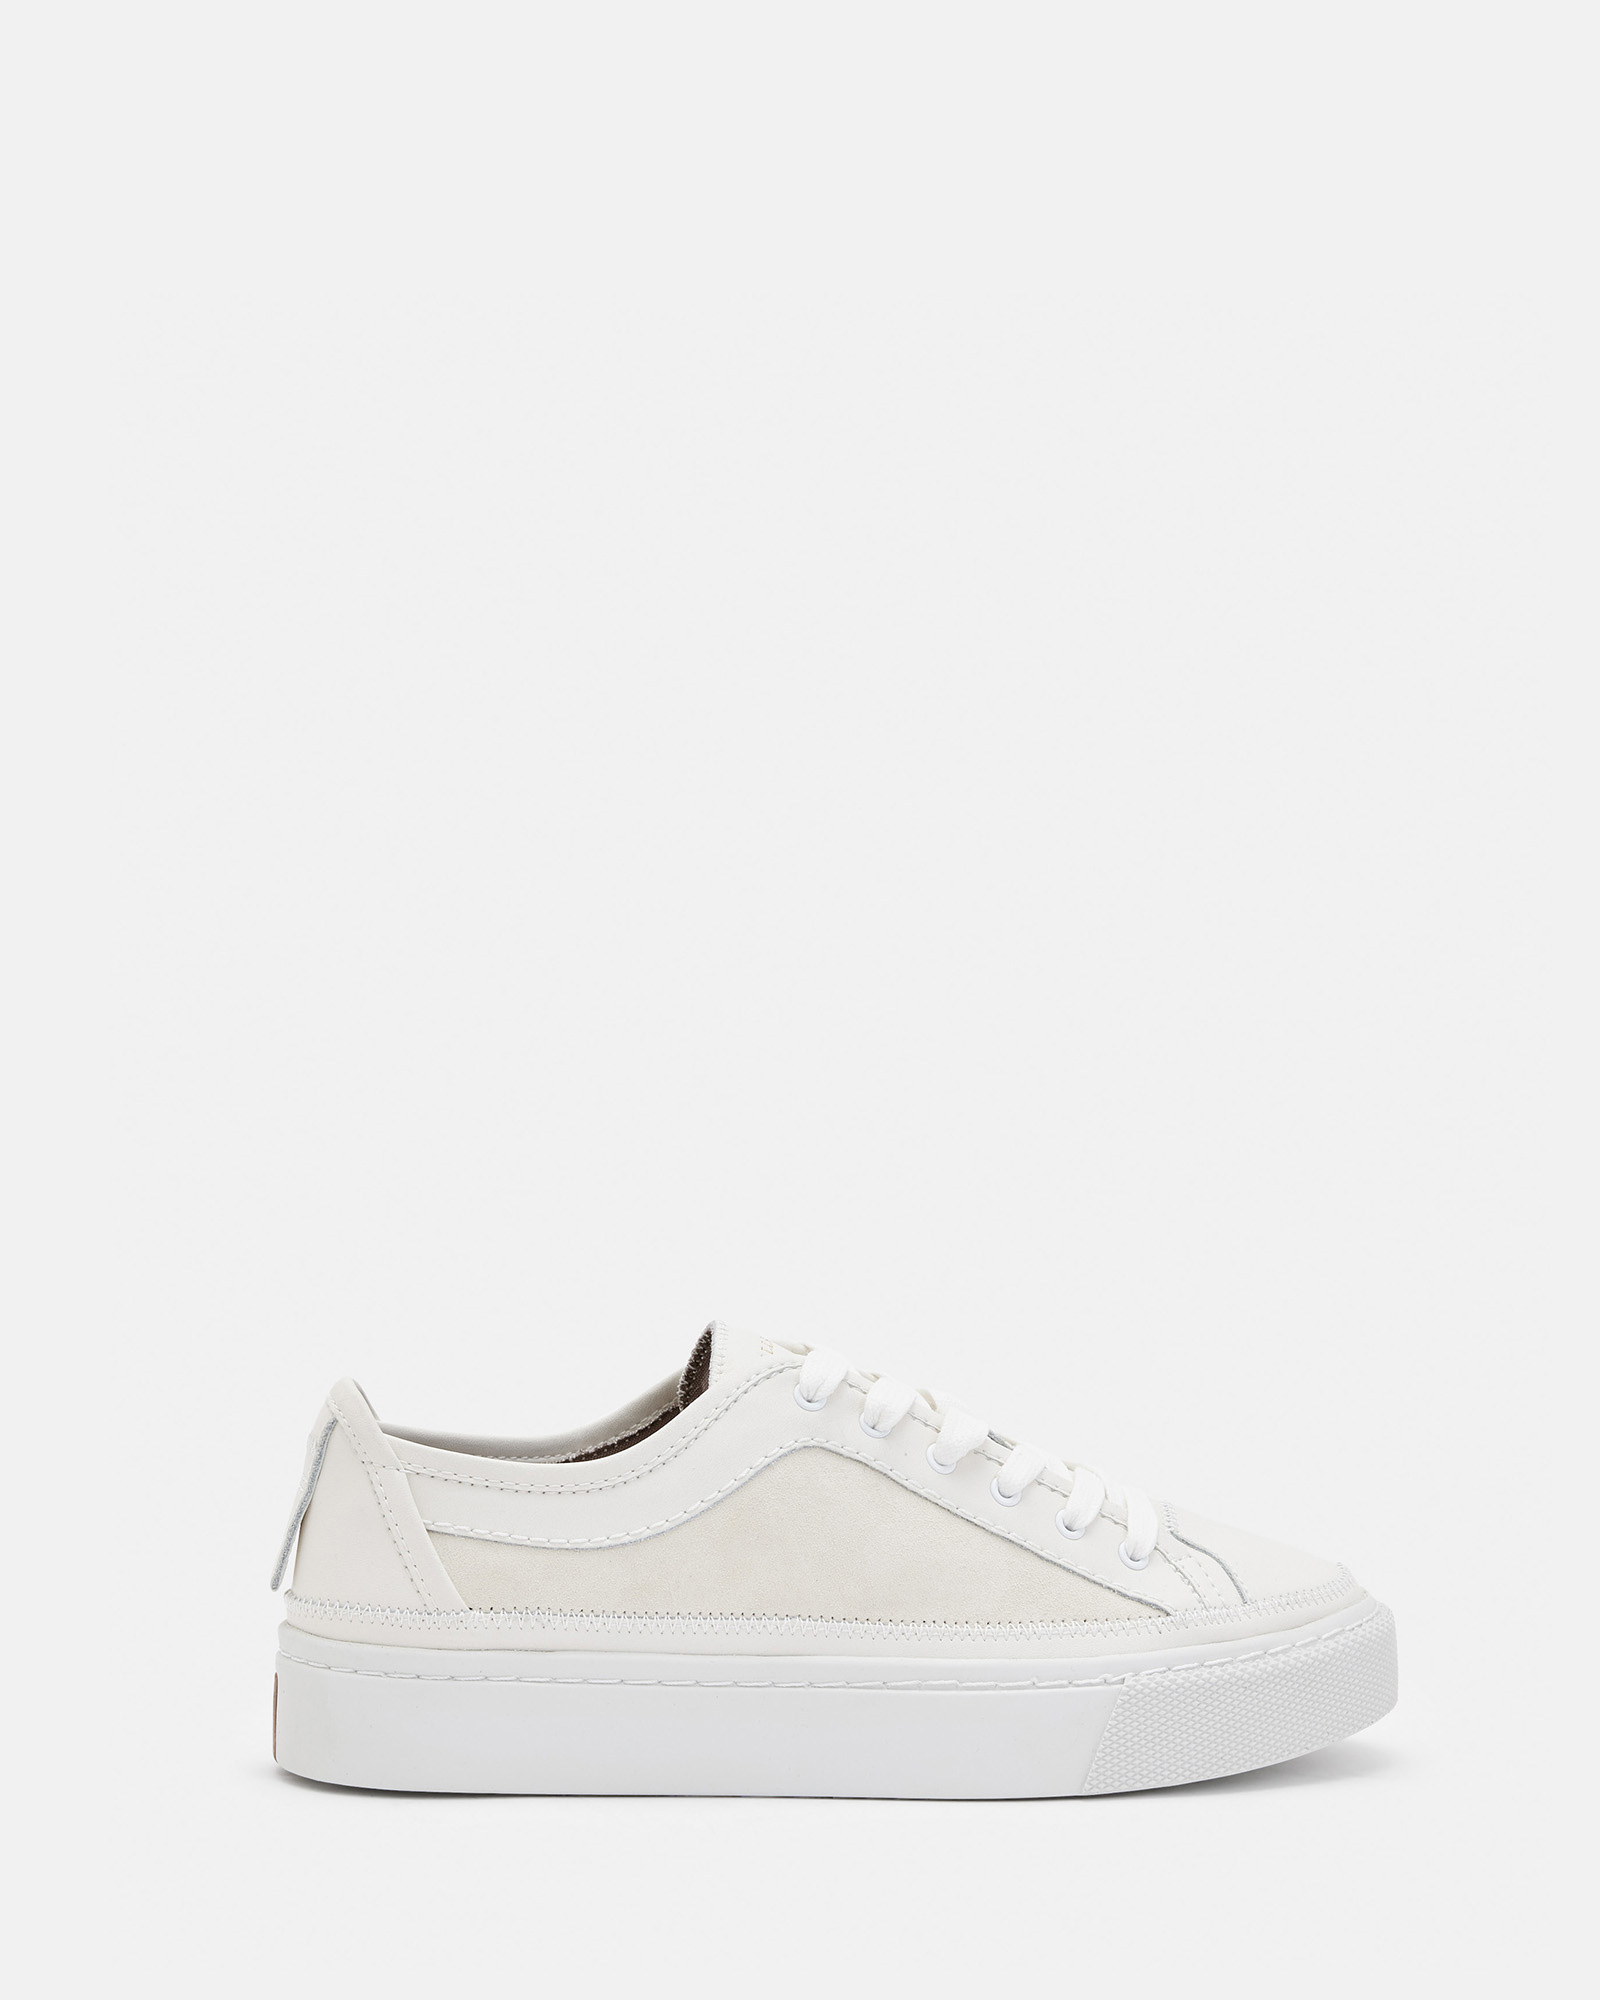 AllSaints Milla Suede Lace Up Sneakers